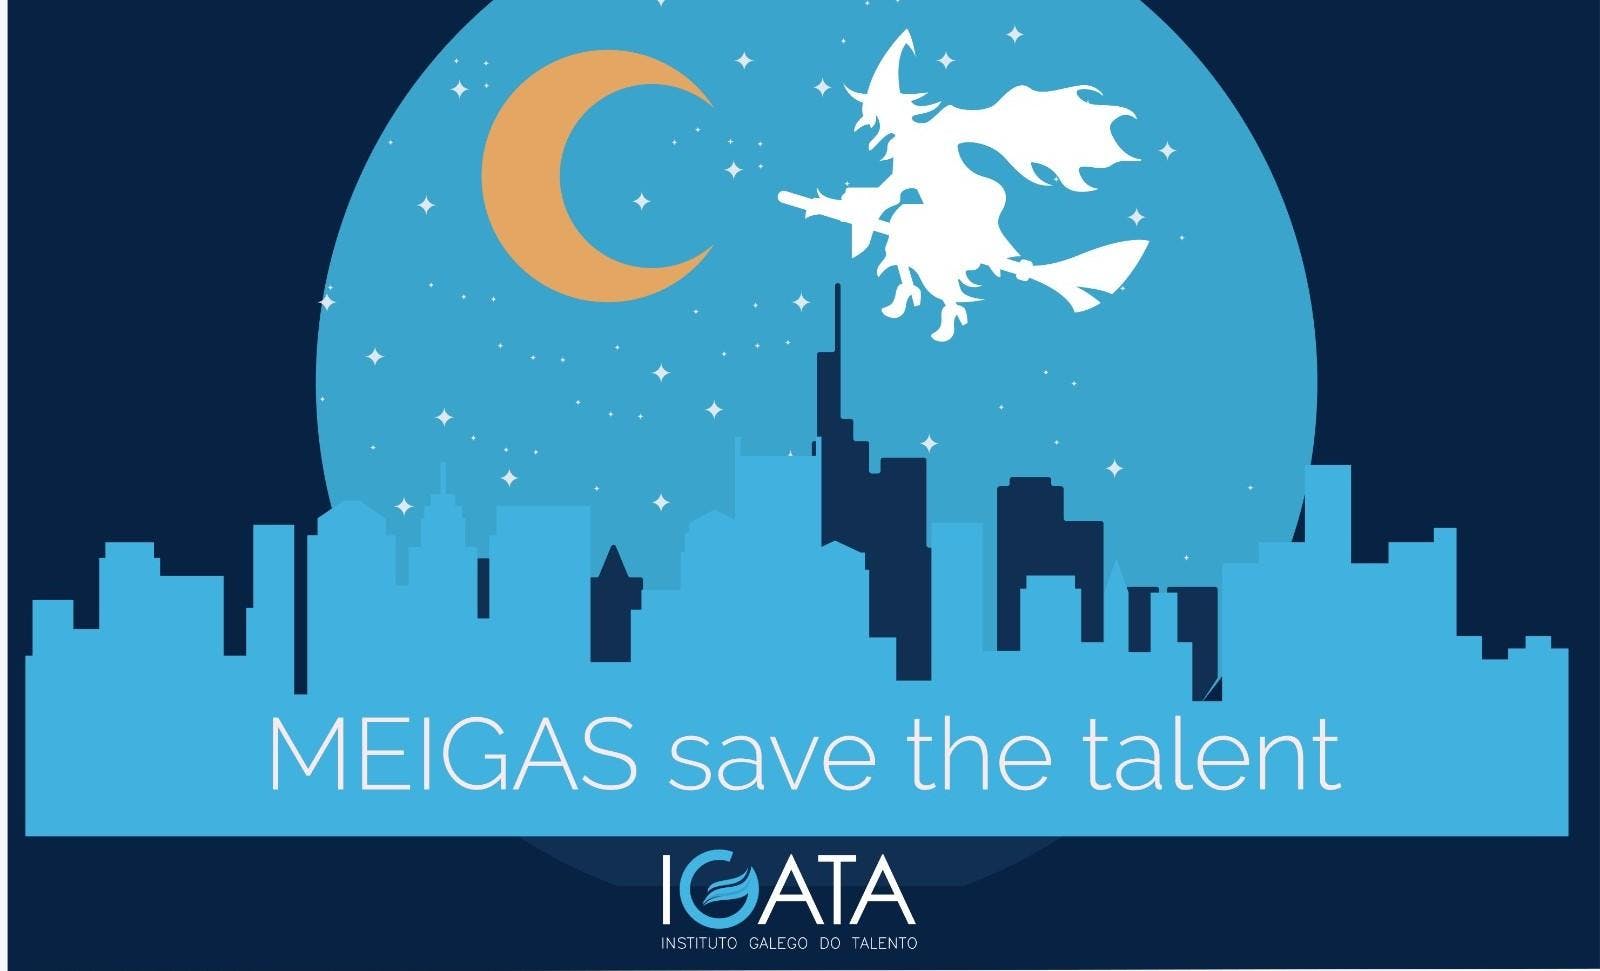 MEIGAS: SAVE THE TALENT